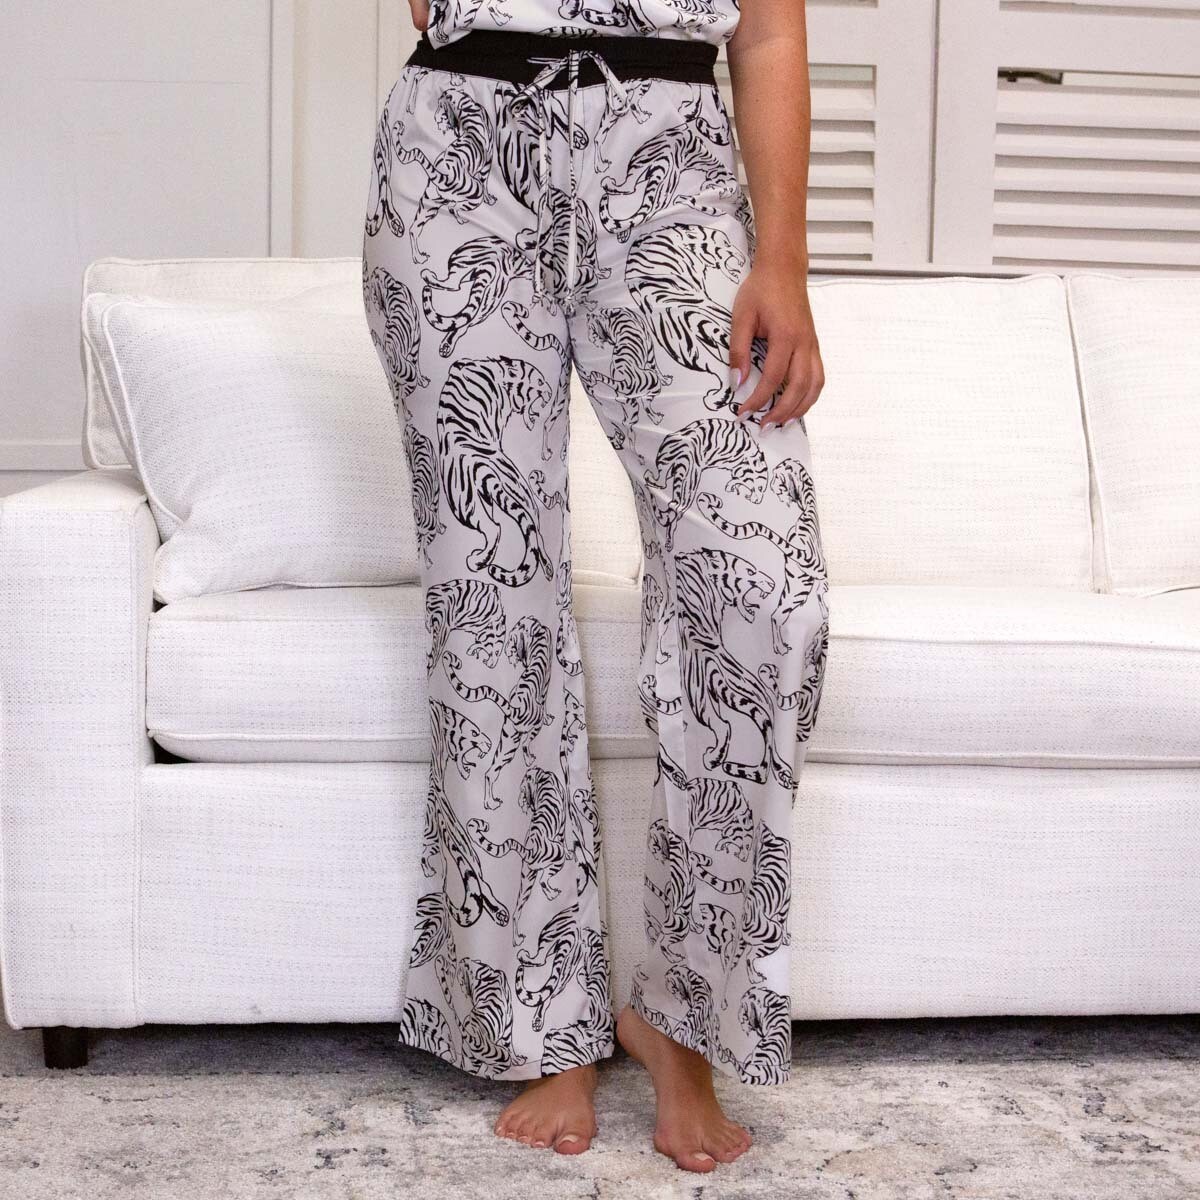 Apparel - One The Prowl Slumber Pants - Large